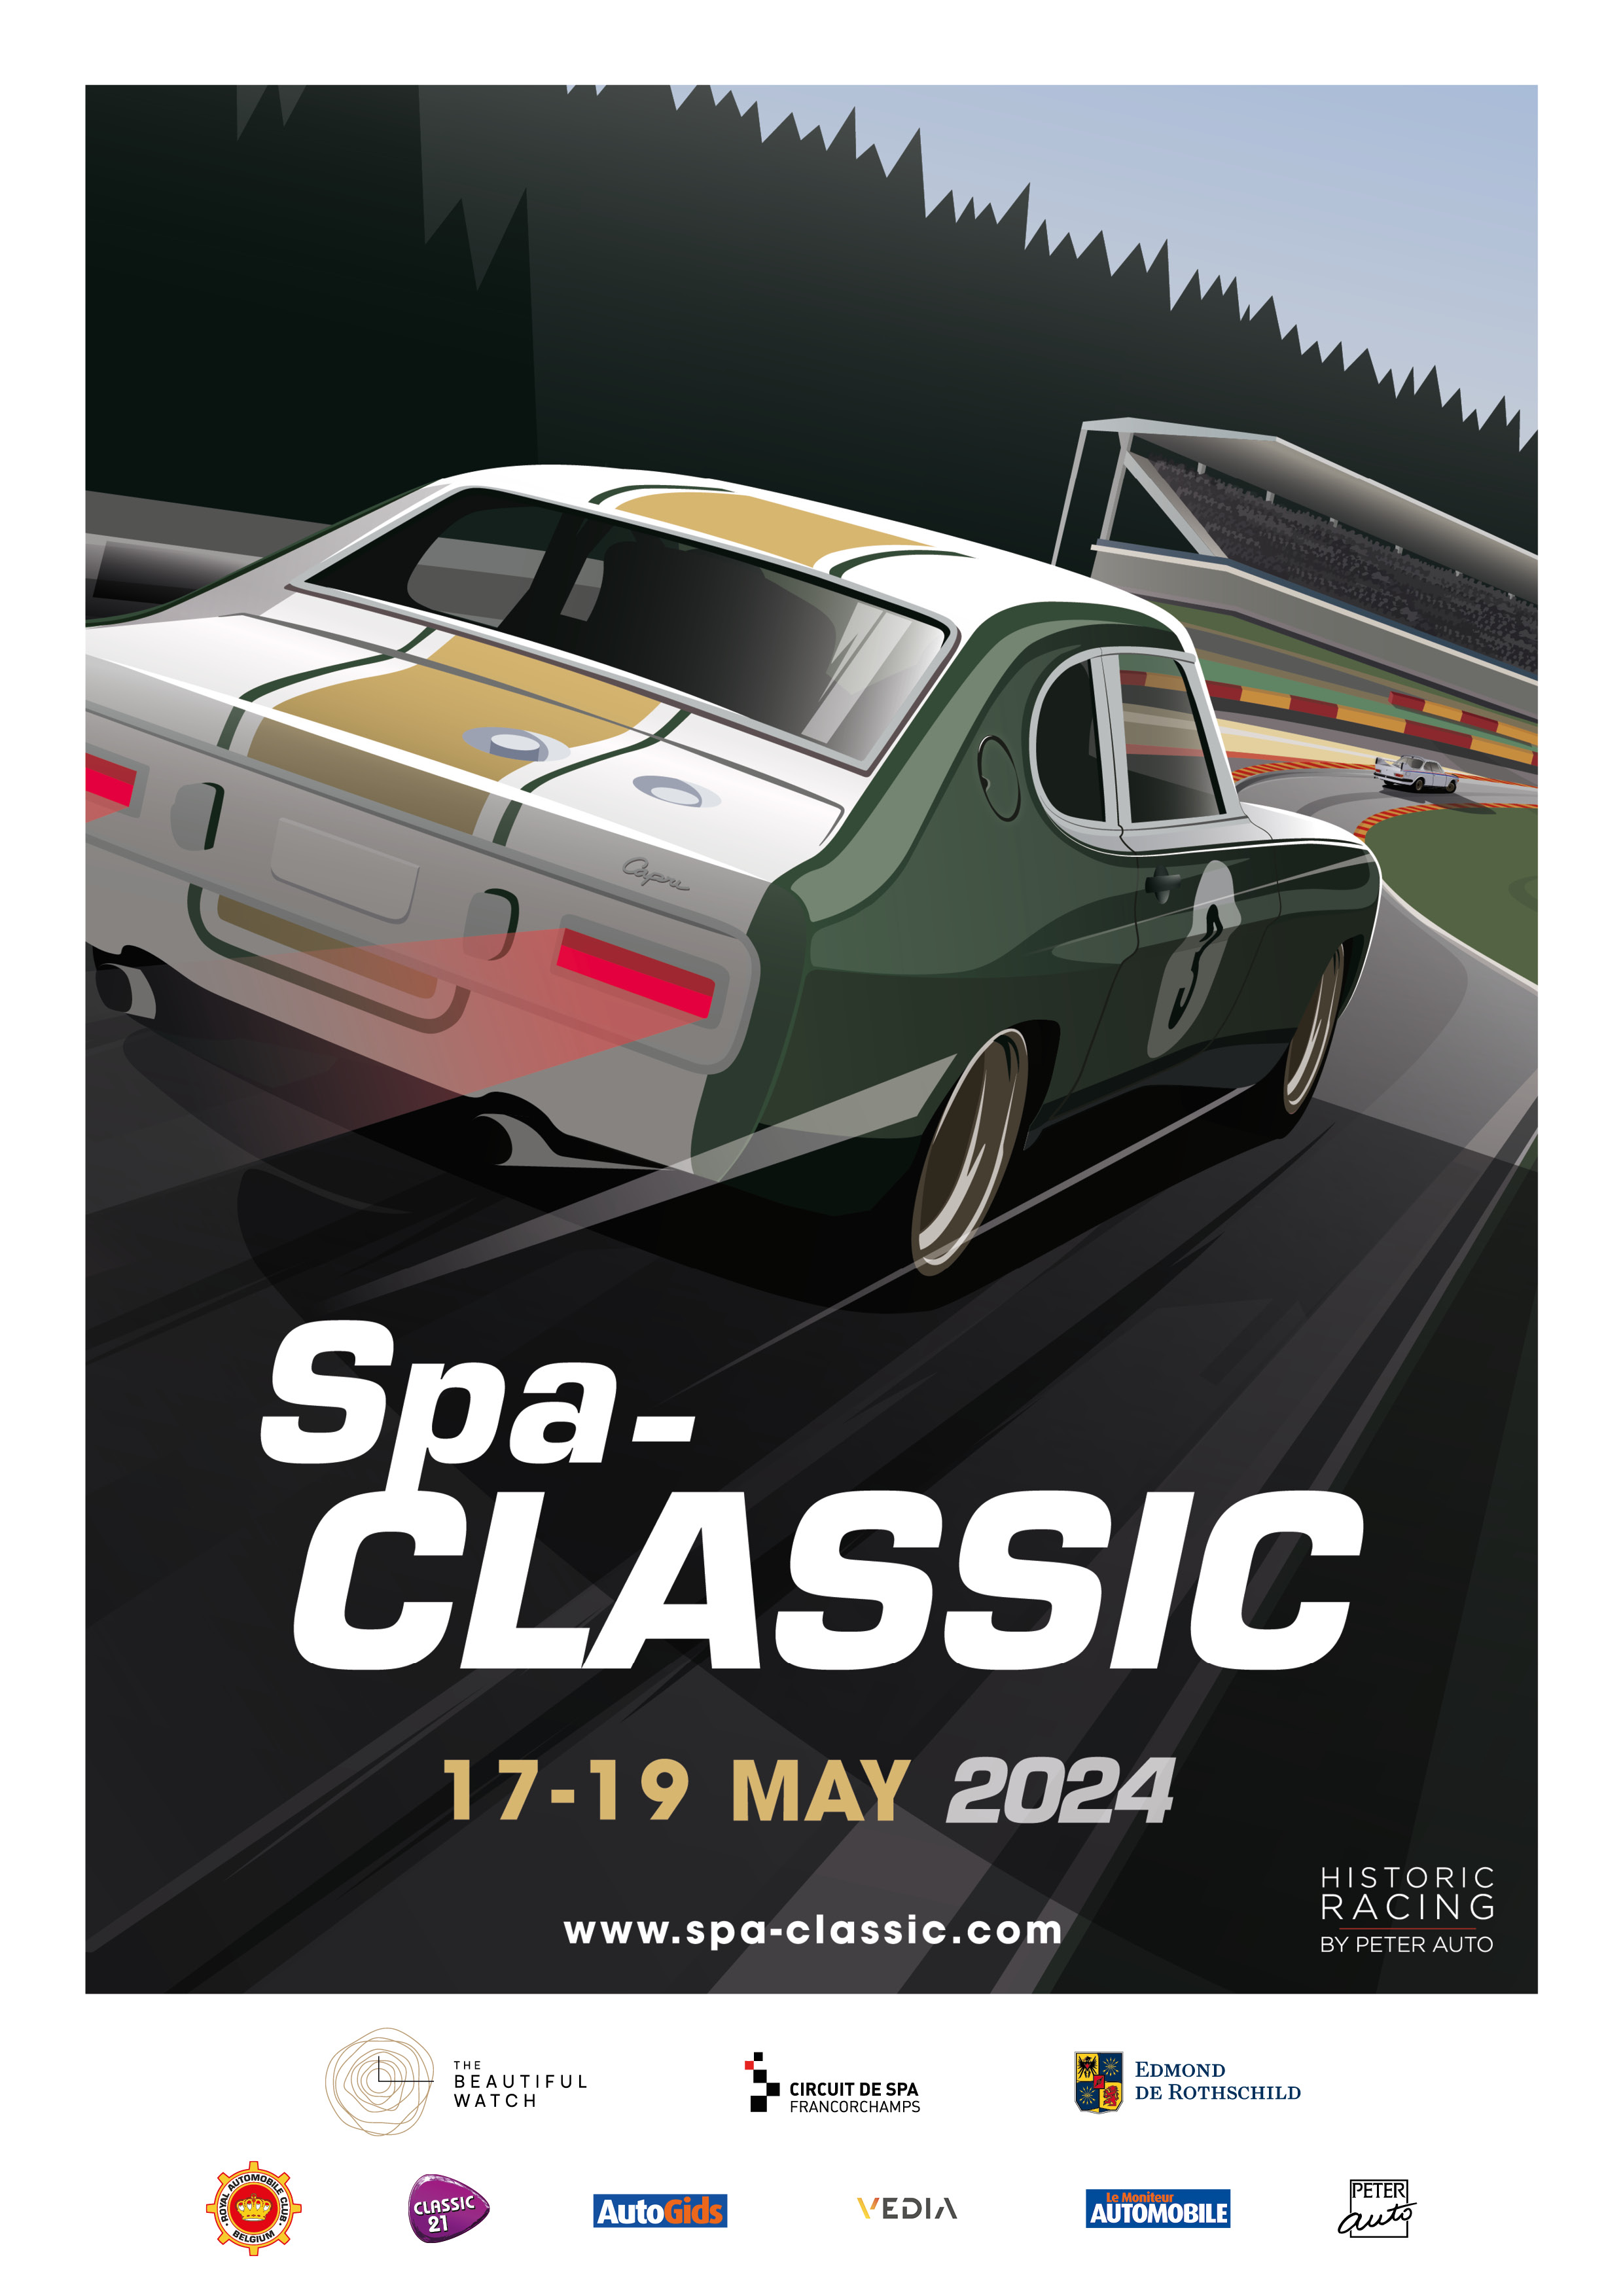 Spa-Classic returns to one of the most beautiful circuits in the world on 17, 18 and 19 May 2024